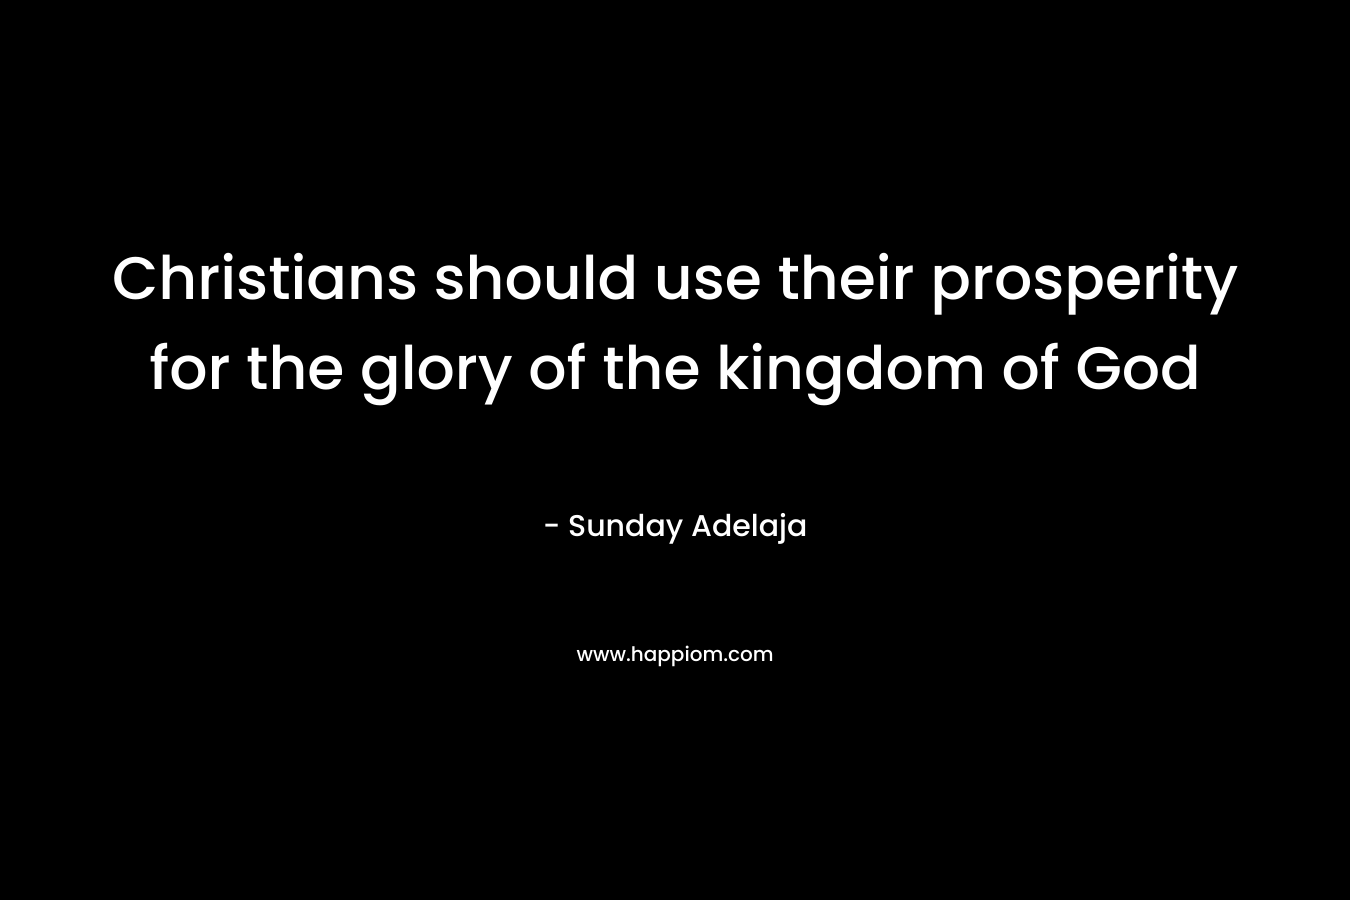 Christians should use their prosperity for the glory of the kingdom of God